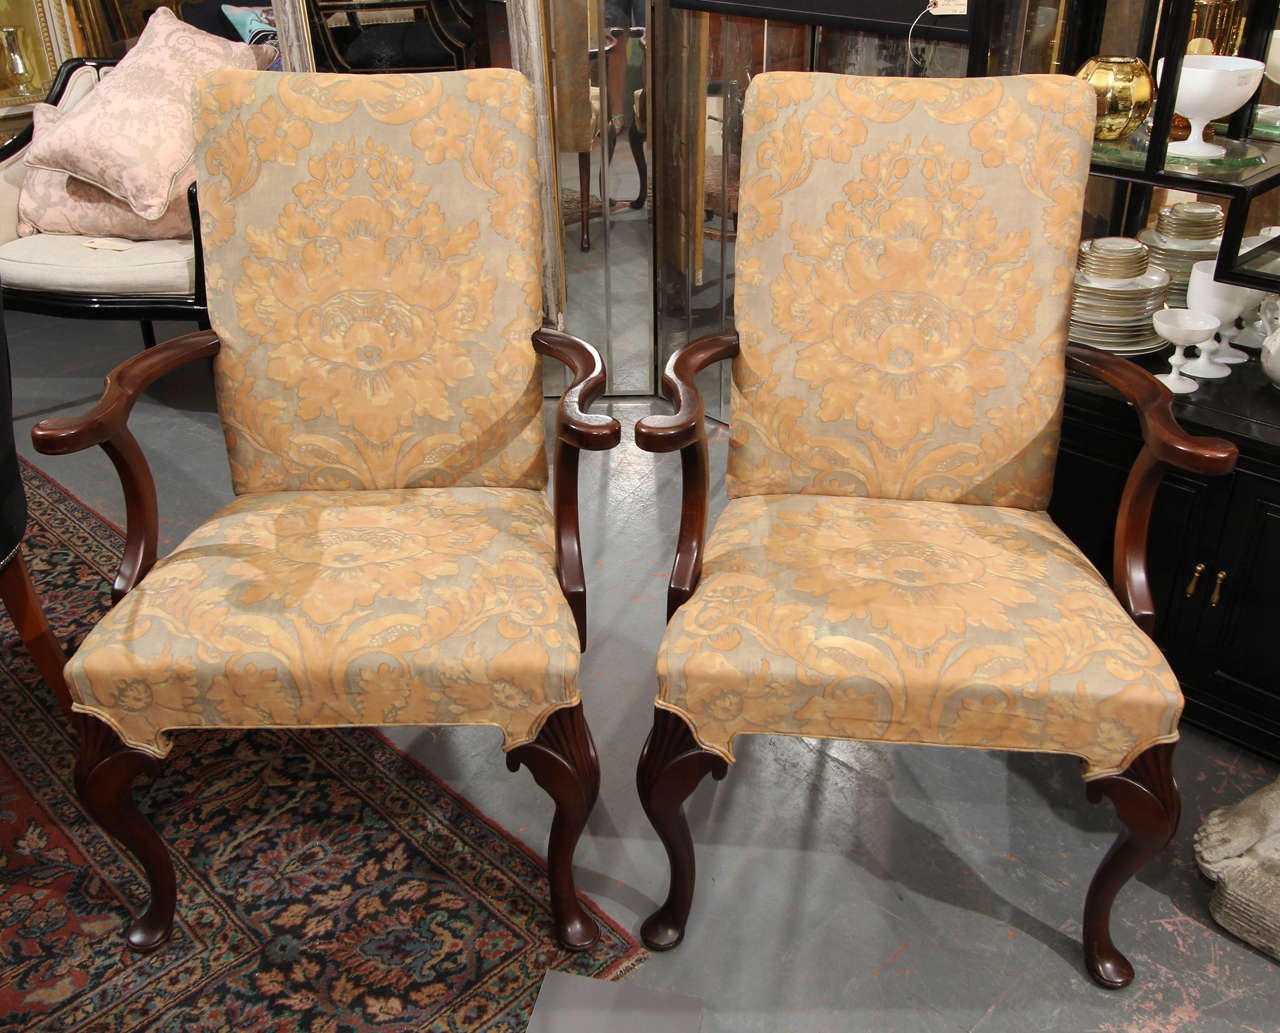 Curvy pair of side chairs upholstered in vintage fortuny fabric.